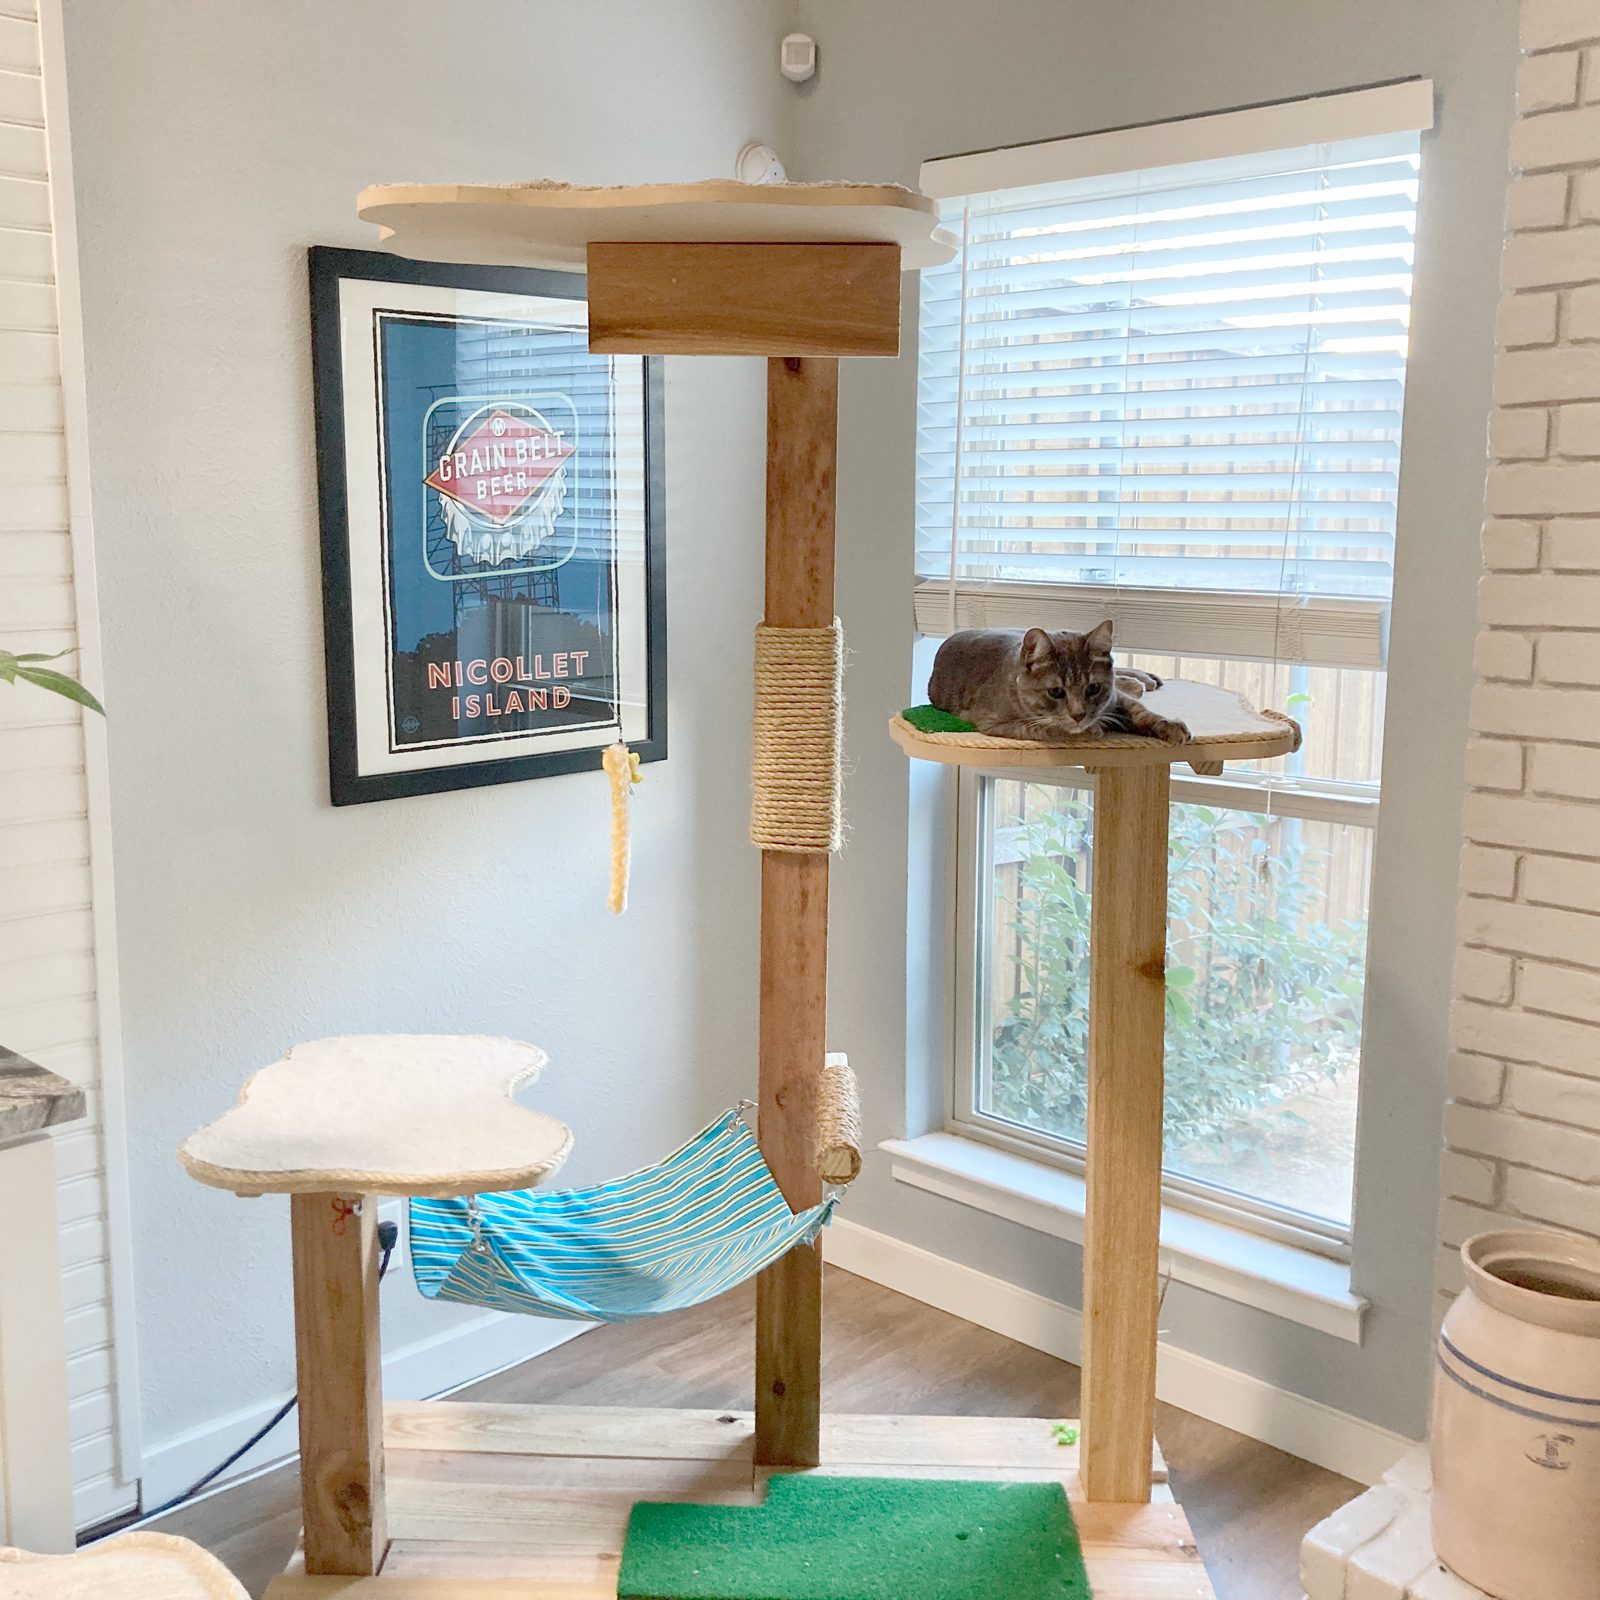 https://www.familyhandyman.com/wp-content/uploads/2022/12/DIY-Cat-Tree-and-TowerCat-tree-finished-w-cat-Ally-Childress-for-FHM-JVedit.jpg